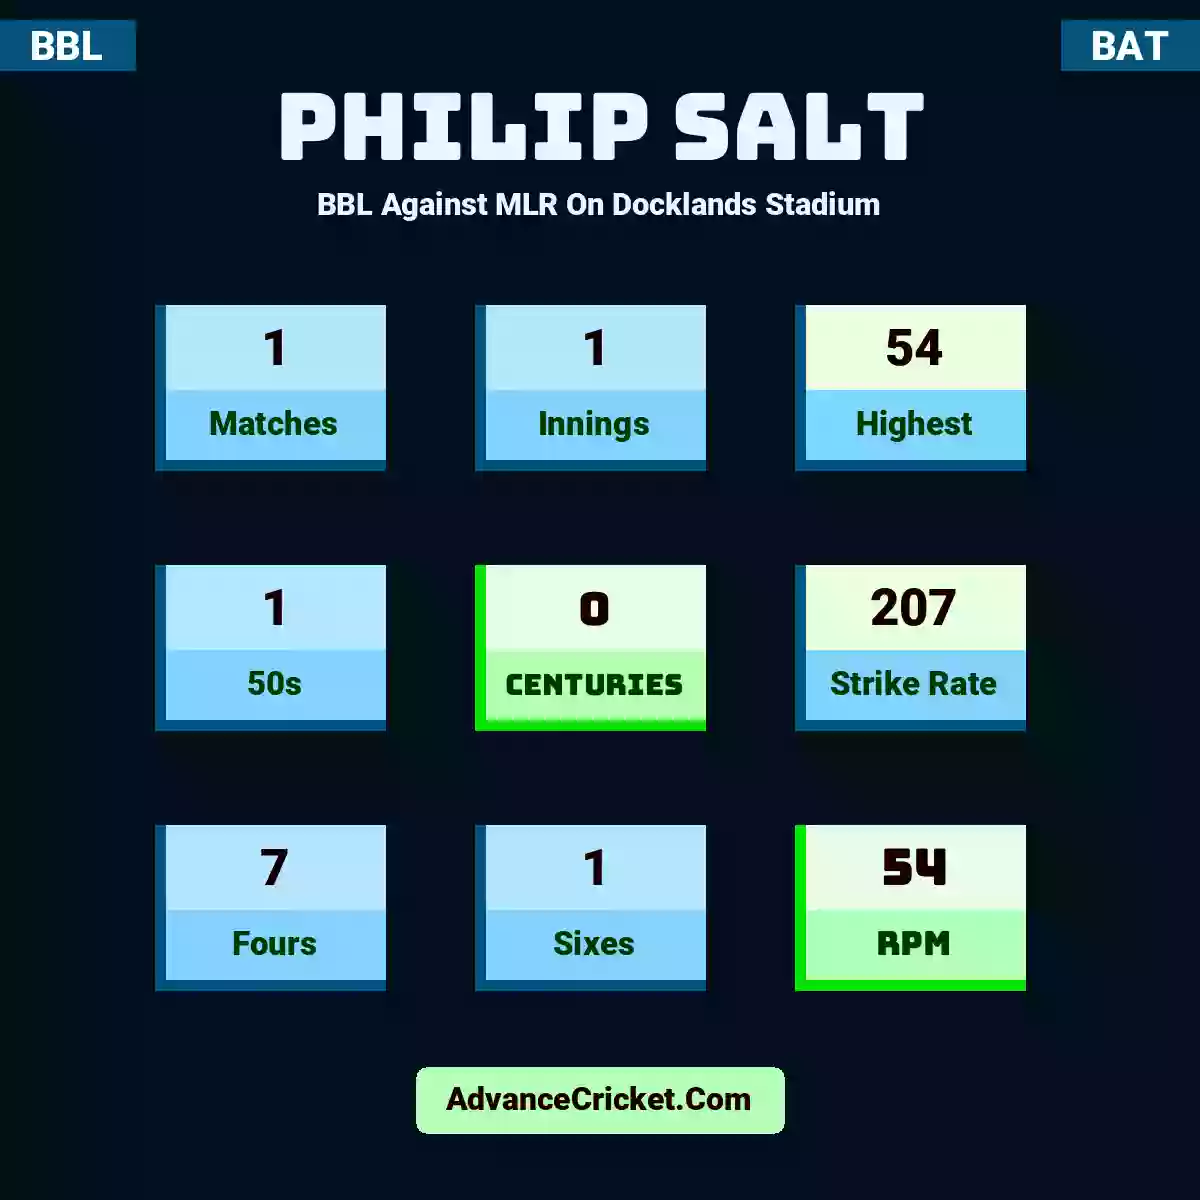 Philip Salt BBL  Against MLR On Docklands Stadium, Philip Salt played 1 matches, scored 54 runs as highest, 1 half-centuries, and 0 centuries, with a strike rate of 207. P.Salt hit 7 fours and 1 sixes, with an RPM of 54.